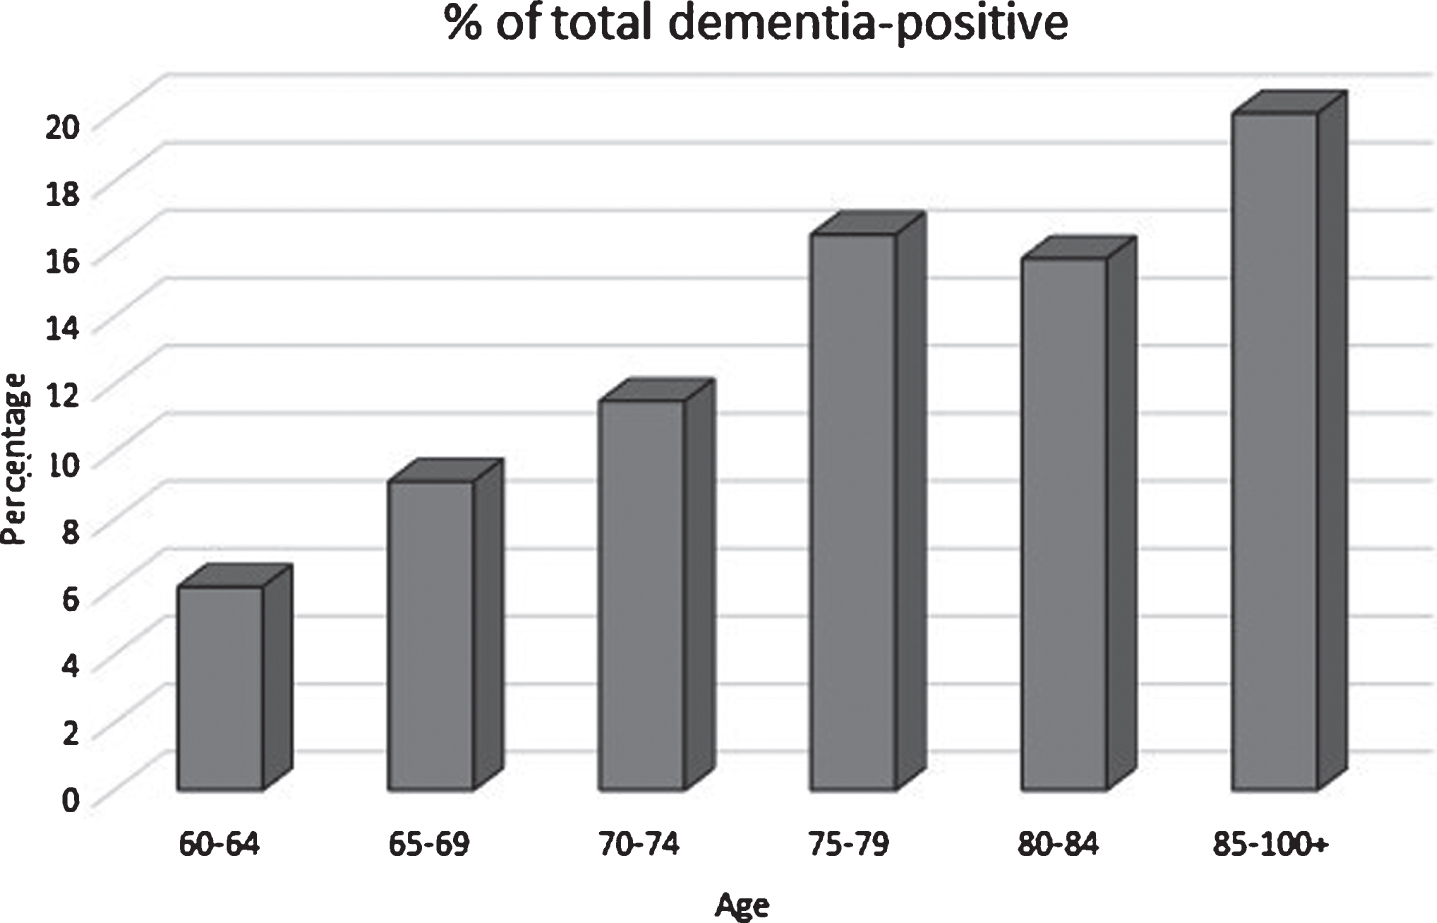 Dementia-positive percentage by age group in the study population.